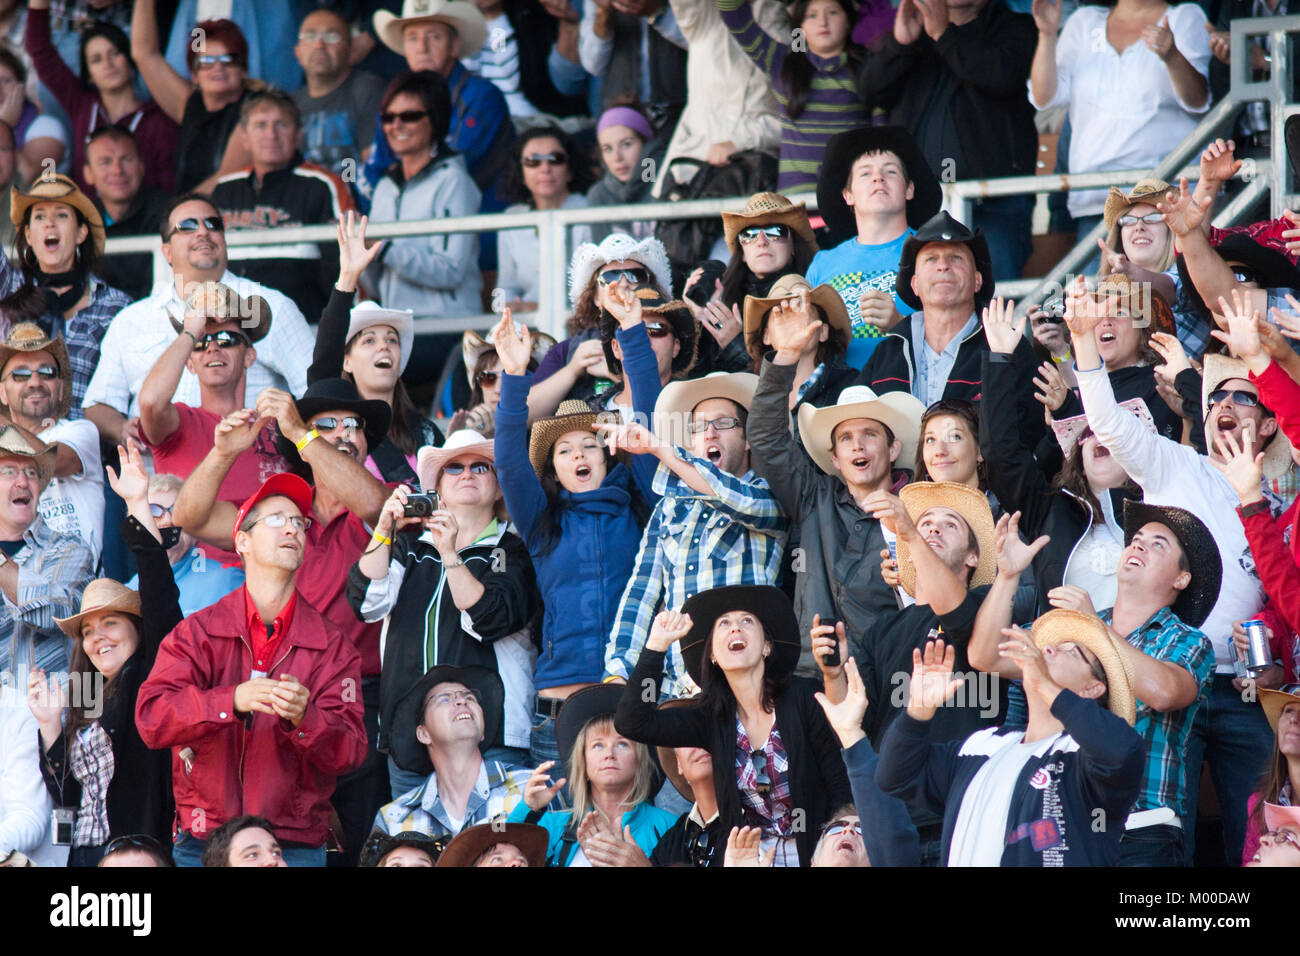 St-Tite, Canada, September 10, 2011.Crowd of people enjoying the rodeo competitions at the St-Tite Western Festival.Credit:Mario Beauregard/Alamy Live Stock Photo